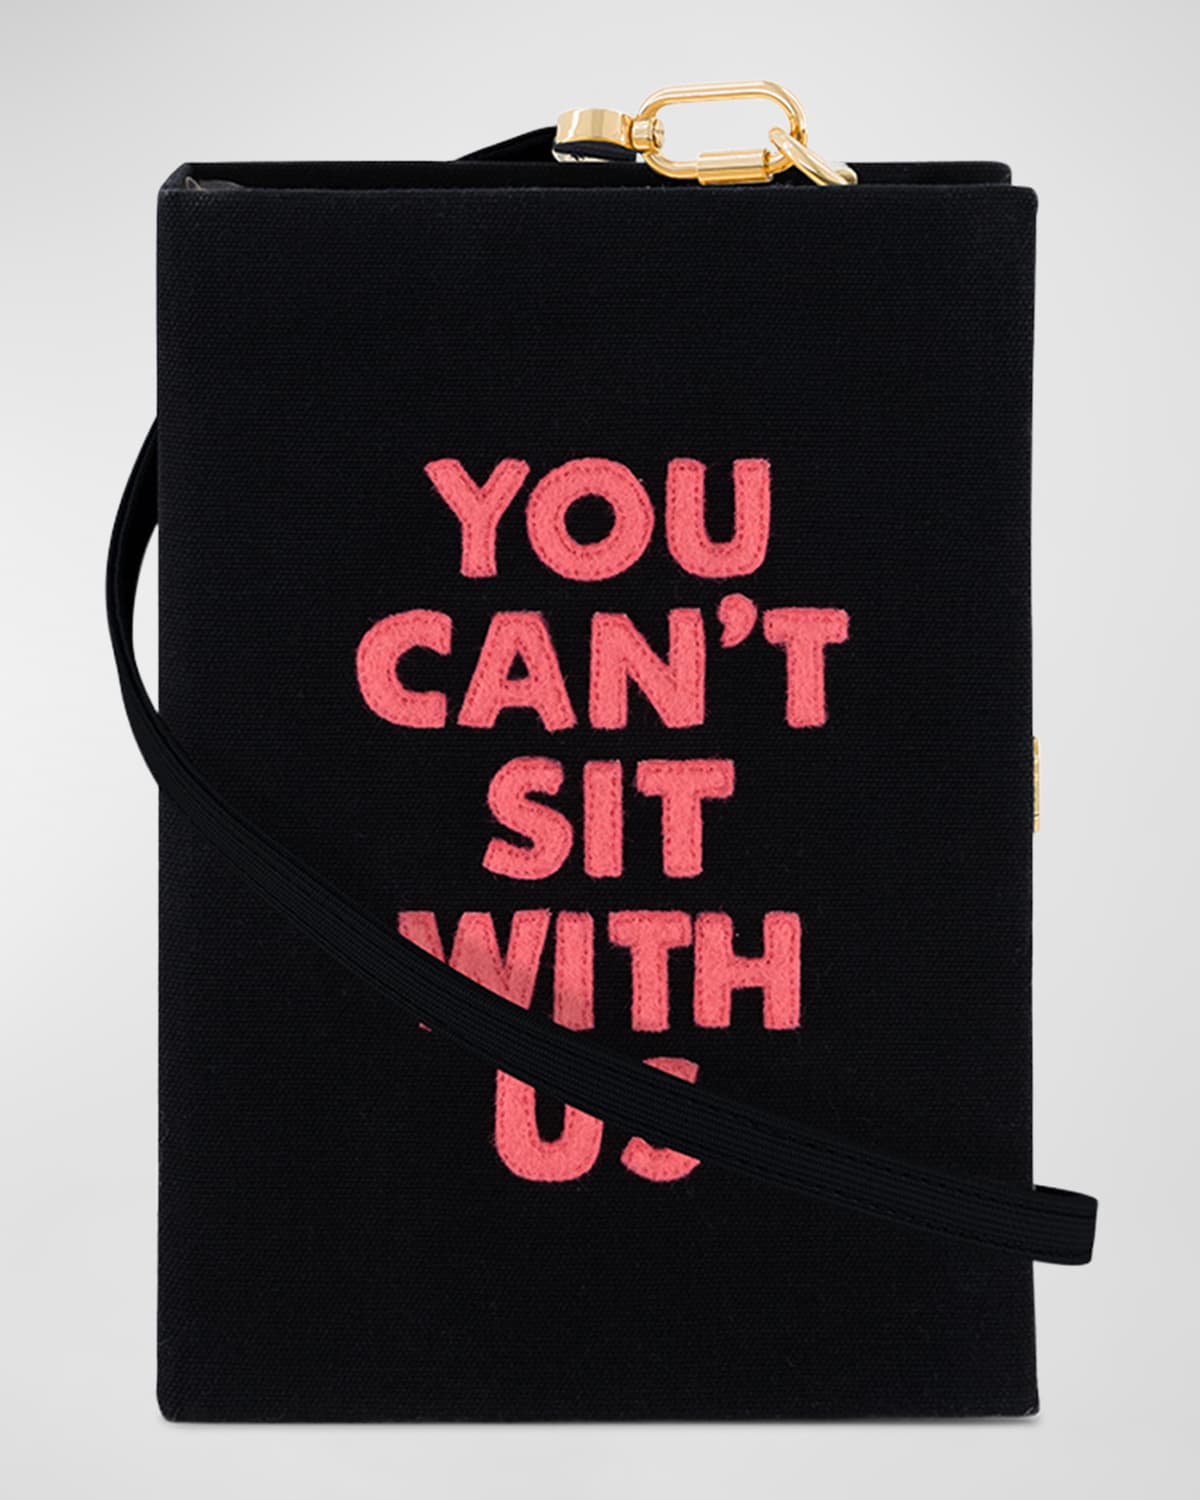 OLYMPIA LE-TAN YOU CAN'T SIT WITH US BOOK CLUTCH BAG